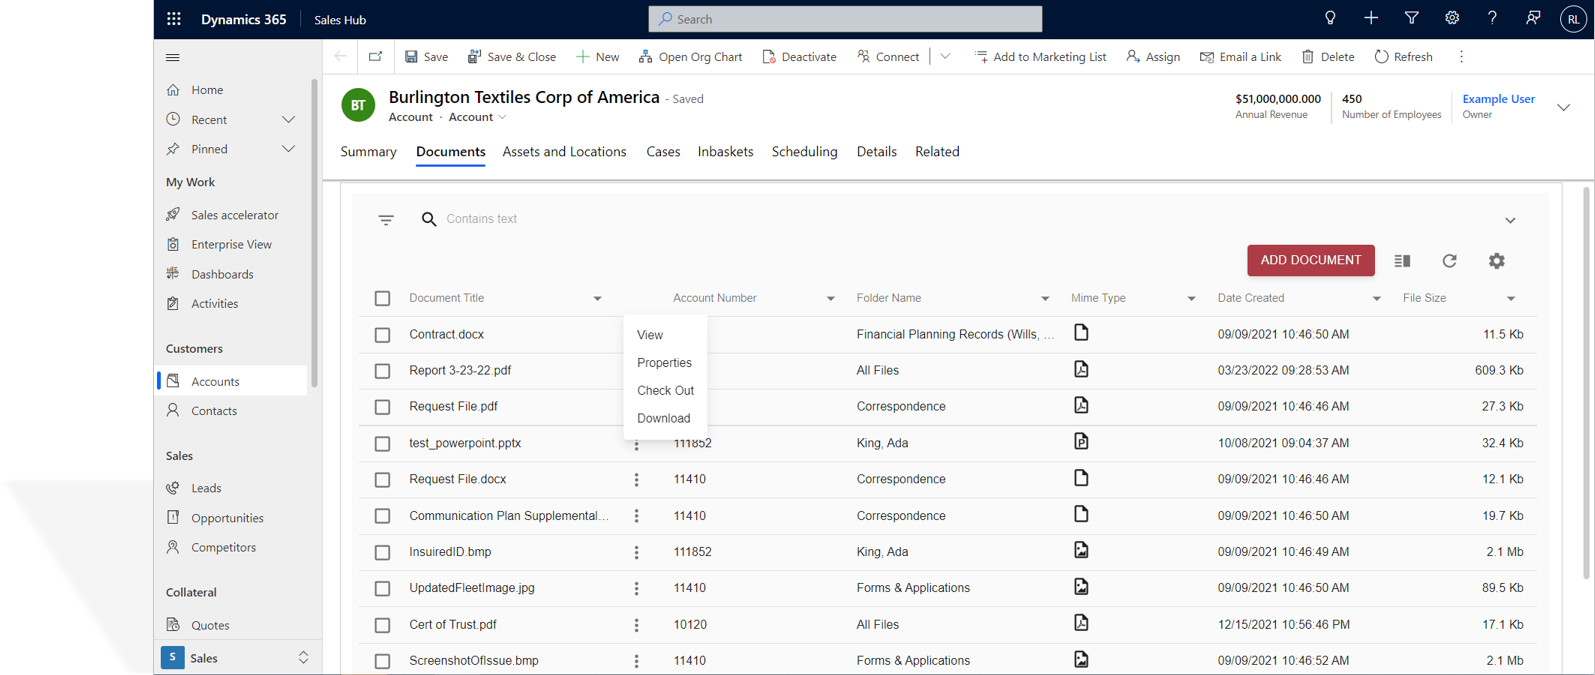 Intellective Unity enables document search in Dynamics CRM